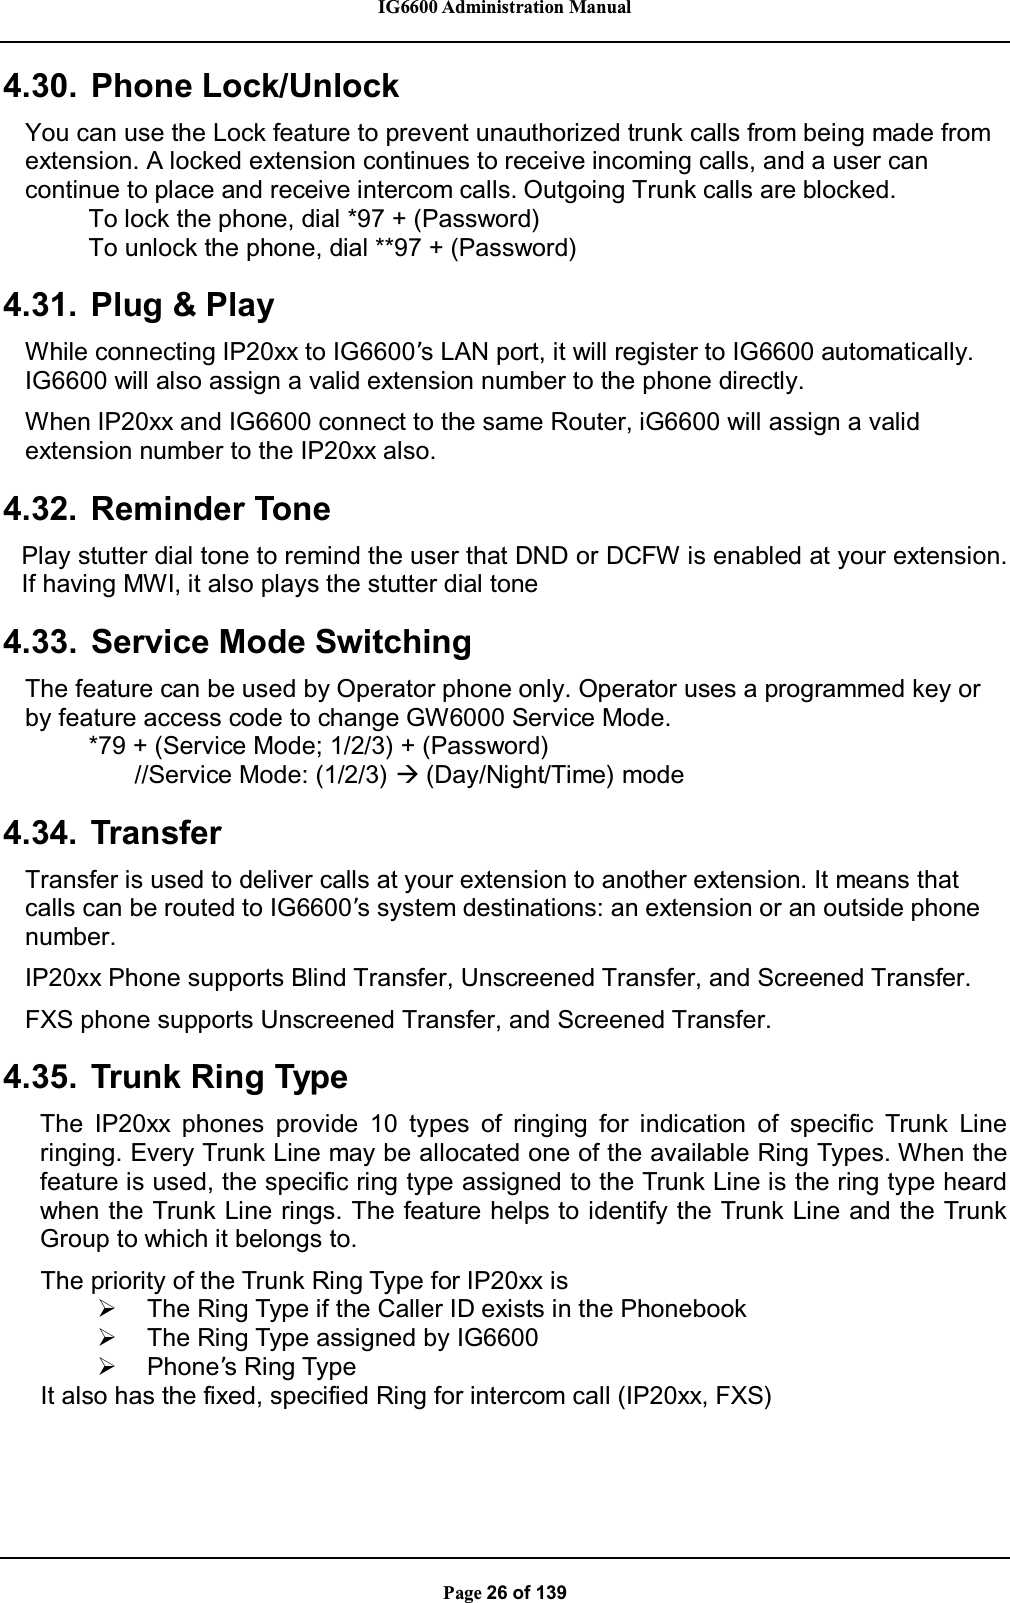 IG6600 Administration ManualPage 26 of 1394.30. Phone Lock/UnlockYou can use the Lock feature to prevent unauthorized trunk calls from being made fromextension. A locked extension continues to receive incoming calls, and a user cancontinue to place and receive intercom calls. Outgoing Trunk calls are blocked.To lock the phone, dial *97 + (Password)To unlock the phone, dial **97 + (Password)4.31. Plug &amp; PlayWhile connecting IP20xx to IG6600’s LAN port, it will register to IG6600 automatically.IG6600 will also assign a valid extension number to the phone directly.When IP20xx and IG6600 connect to the same Router, iG6600 will assign a validextension number to the IP20xx also.4.32. Reminder TonePlay stutter dial tone to remind the user that DND or DCFW is enabled at your extension.If having MWI, it also plays the stutter dial tone4.33. Service Mode SwitchingThe feature can be used by Operator phone only. Operator uses a programmed key orby feature access code to change GW6000 Service Mode.*79 + (Service Mode; 1/2/3) + (Password)//Service Mode: (1/2/3) Æ(Day/Night/Time) mode4.34. TransferTransfer is used to deliver calls at your extension to another extension. It means thatcalls can be routed to IG6600’s system destinations: an extension or an outside phonenumber.IP20xx Phone supports Blind Transfer, Unscreened Transfer, and Screened Transfer.FXS phone supports Unscreened Transfer, and Screened Transfer.4.35. Trunk Ring TypeThe IP20xx phones provide 10 types of ringing for indication of specific Trunk Lineringing. Every Trunk Line may be allocated one of the available Ring Types. When thefeature is used, the specific ring type assigned to the Trunk Line is the ring type heardwhen the Trunk Line rings. The feature helps to identify the Trunk Line and the TrunkGroup to which it belongs to.The priority of the Trunk Ring Type for IP20xx is¾The Ring Type if the Caller ID exists in the Phonebook¾The Ring Type assigned by IG6600¾Phone’s Ring TypeIt also has the fixed, specified Ring for intercom call (IP20xx, FXS)